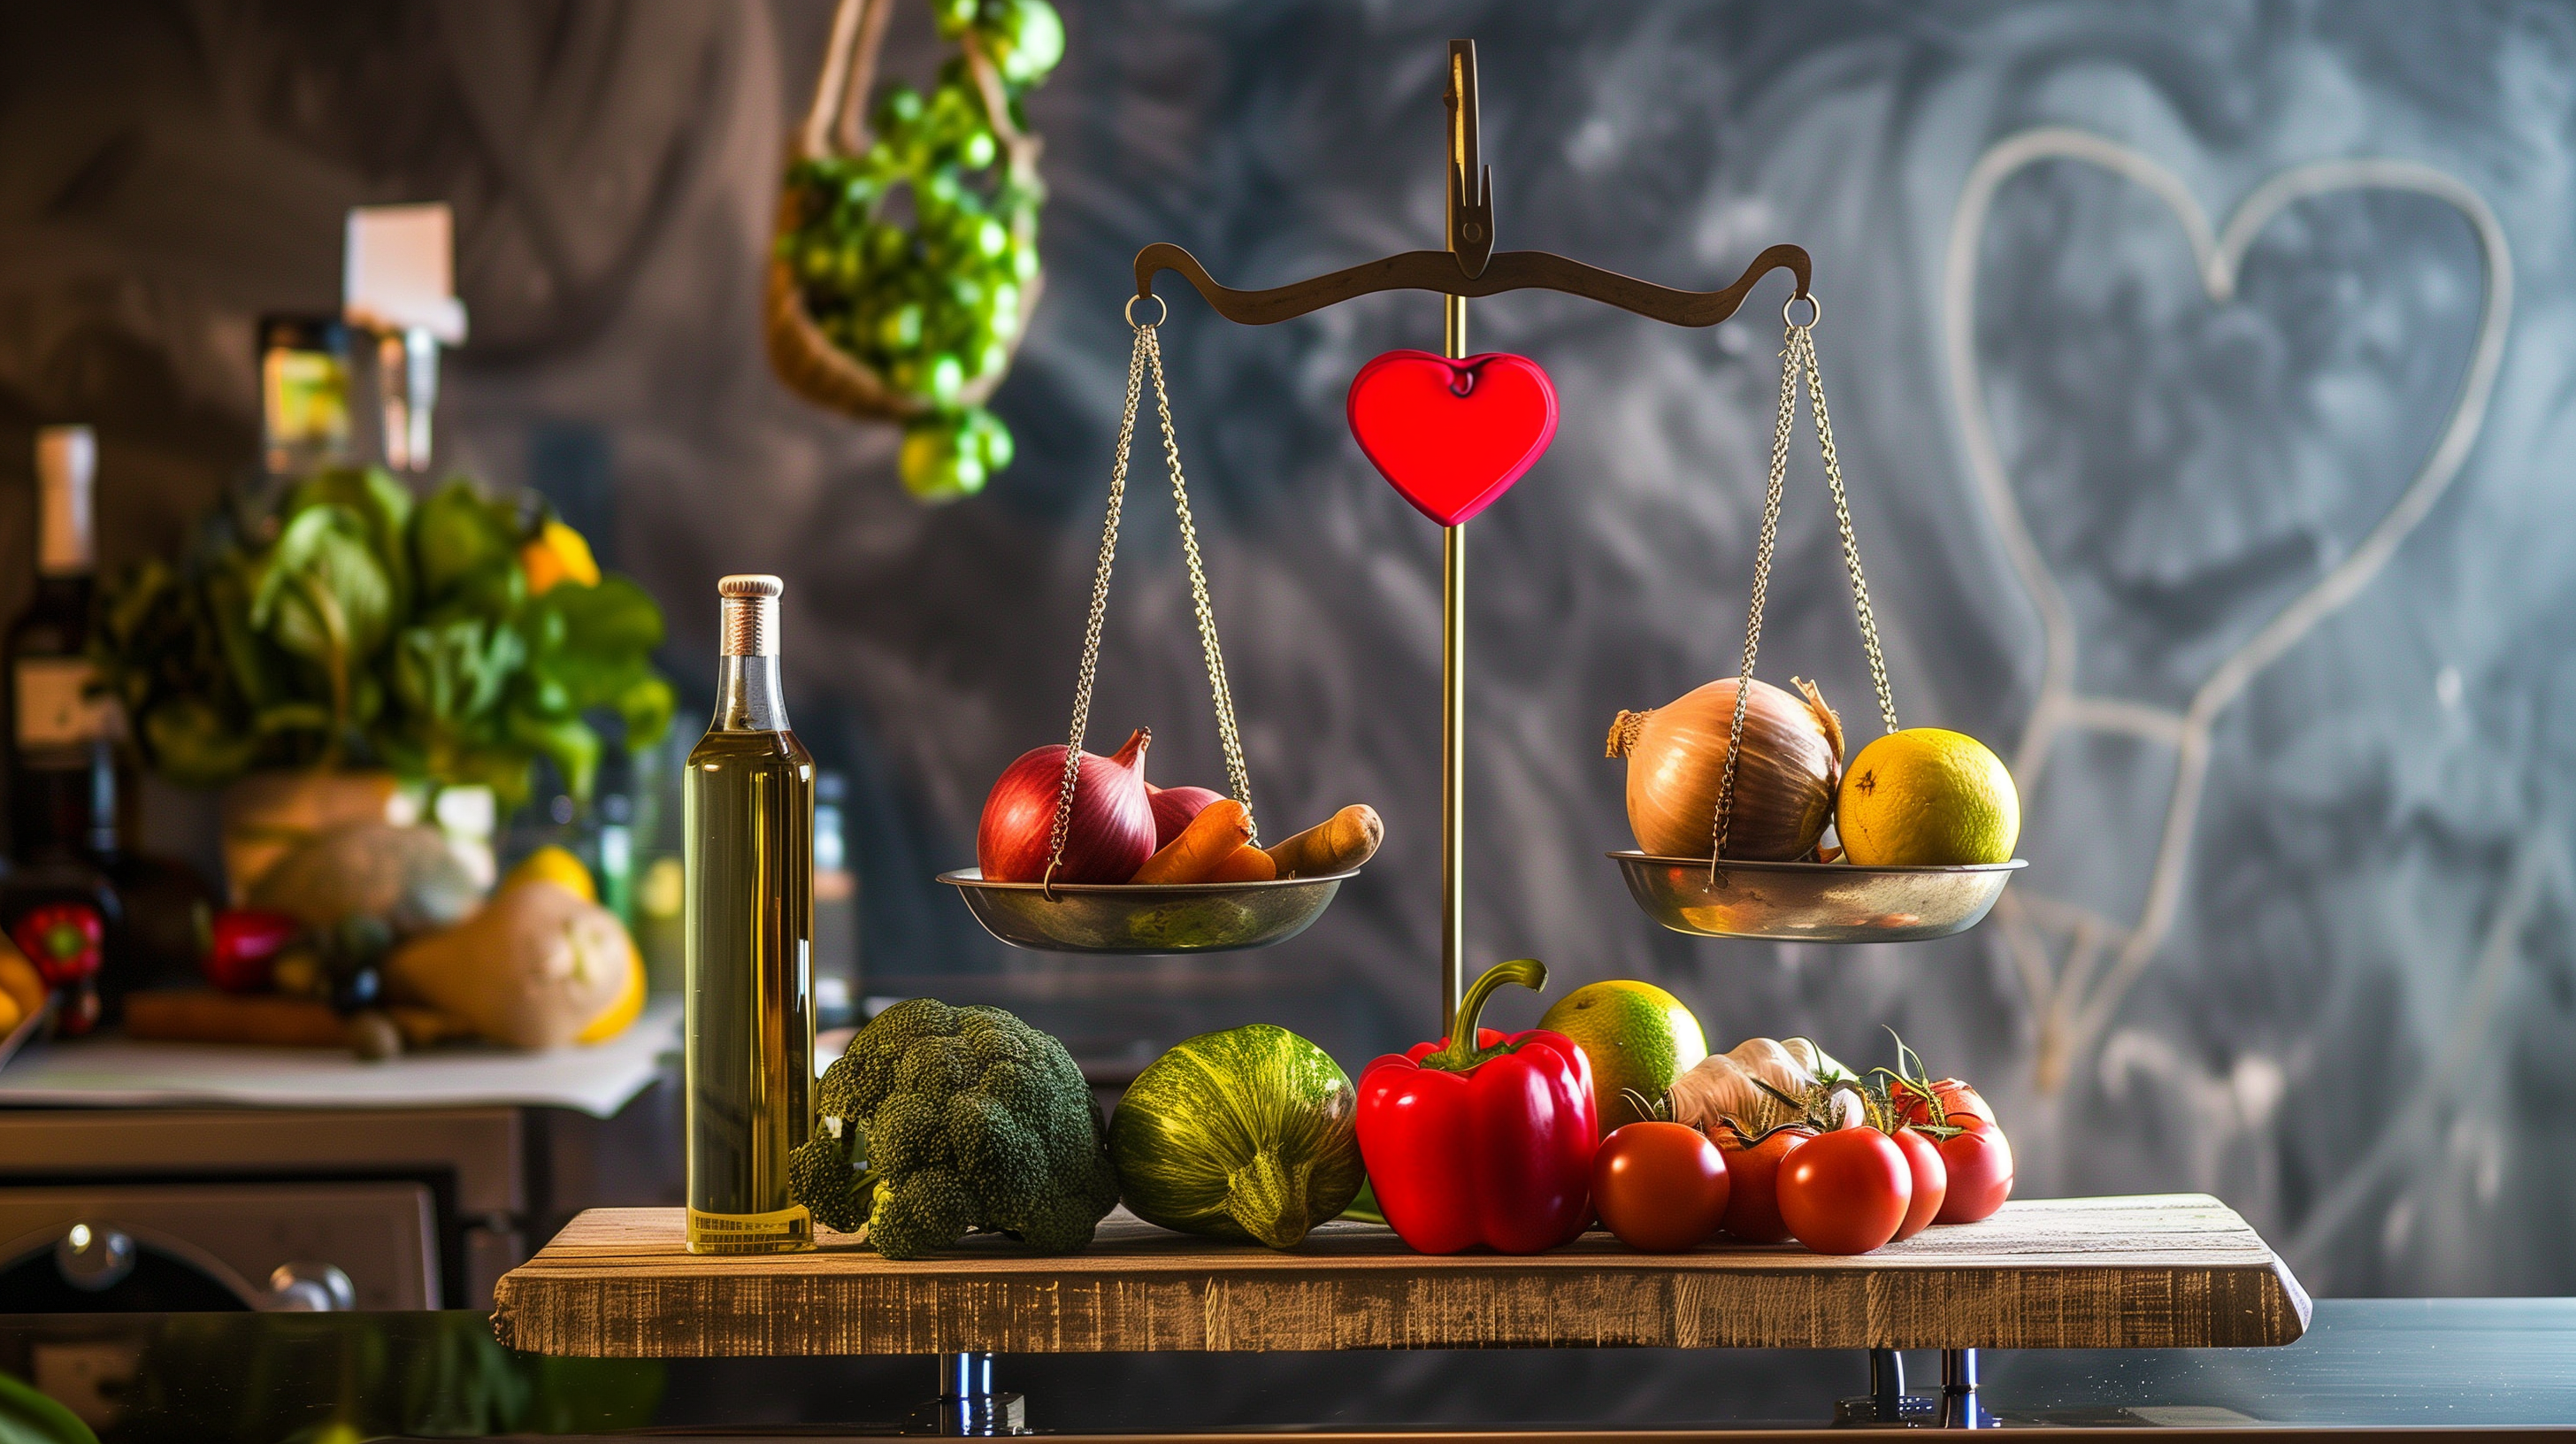 balanced scale with fruits, vegetables